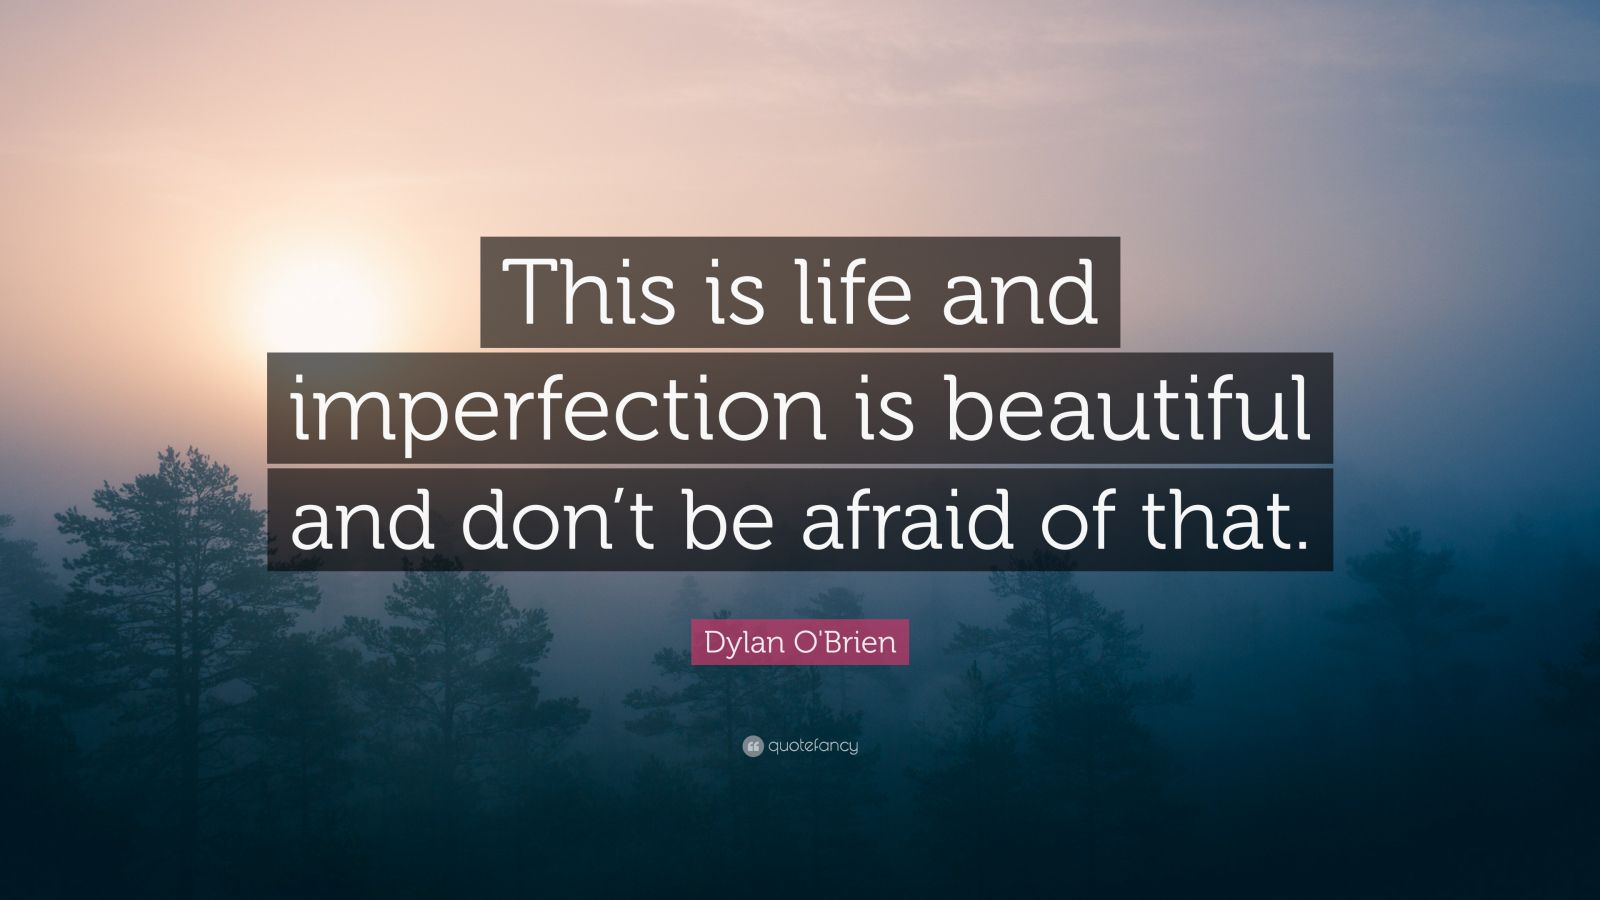 Dylan O'Brien Quote: “This is life and imperfection is beautiful and